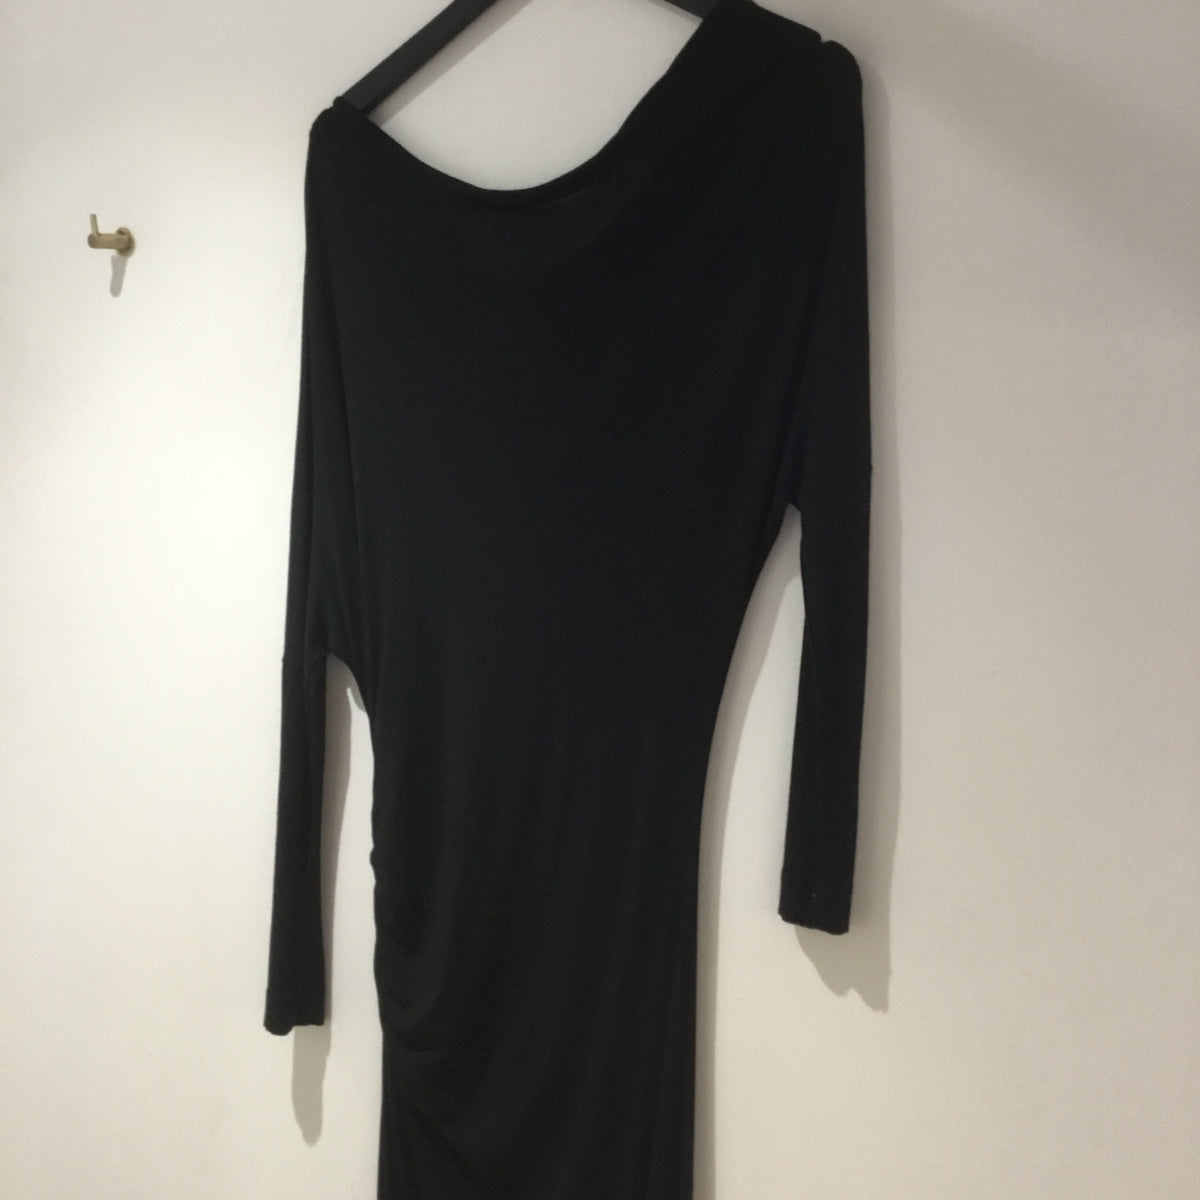 Vivienne Westwood Anglomania Dress Black Size Small